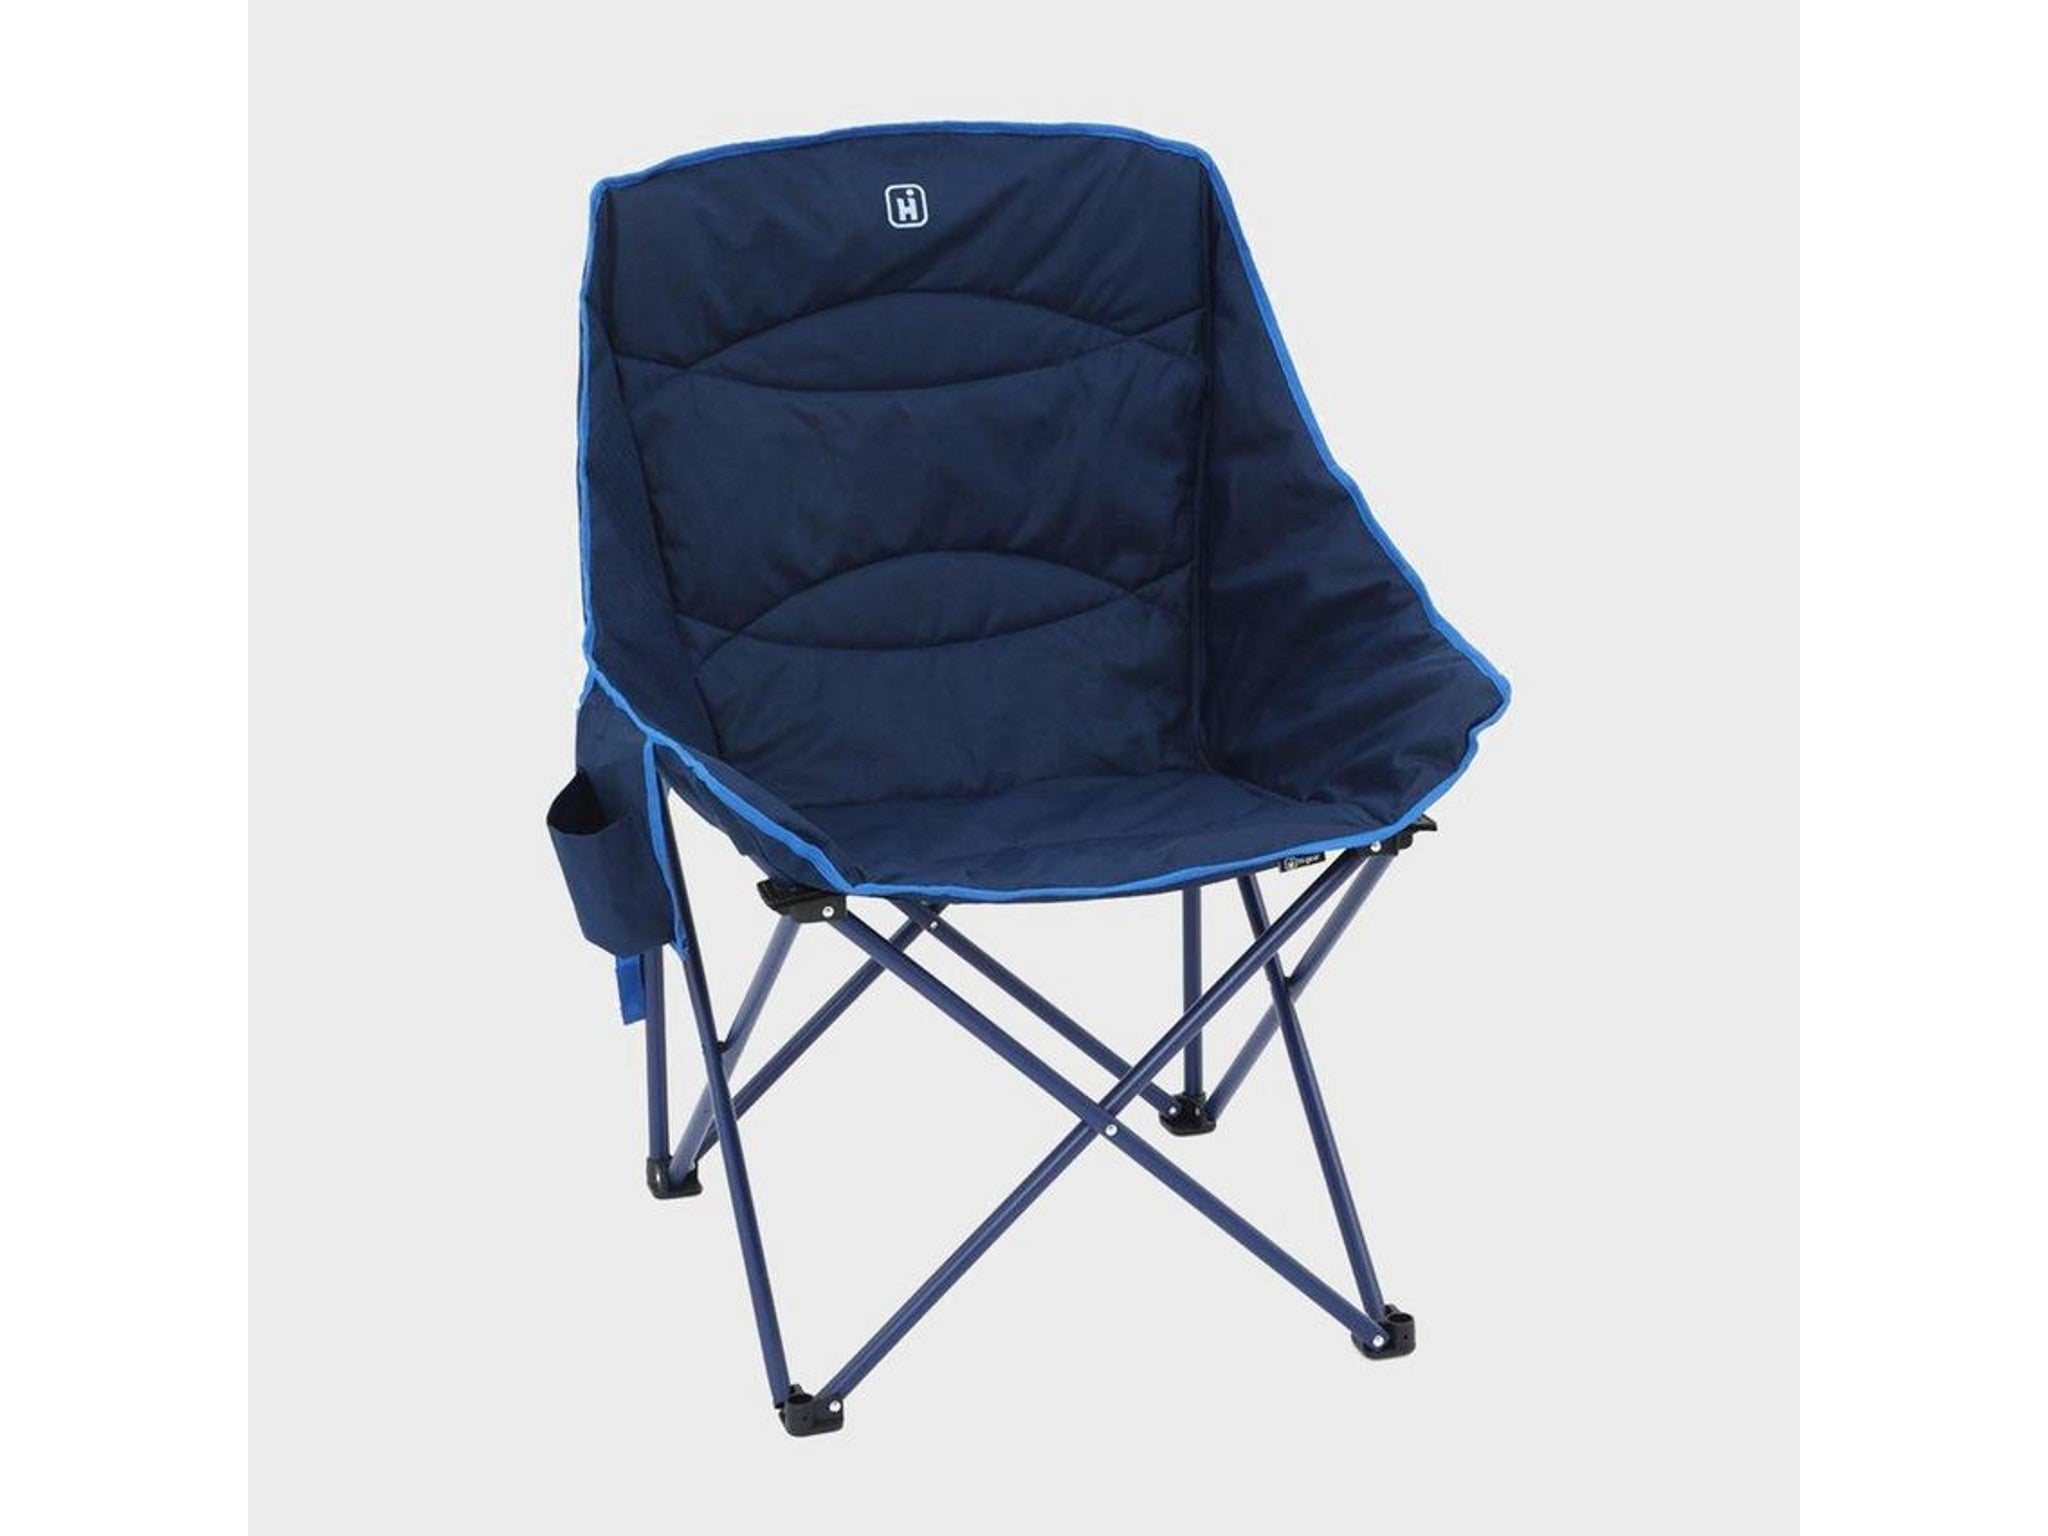 Blue UK Folding Camping Chairs Padded High Back outdoor Portable 